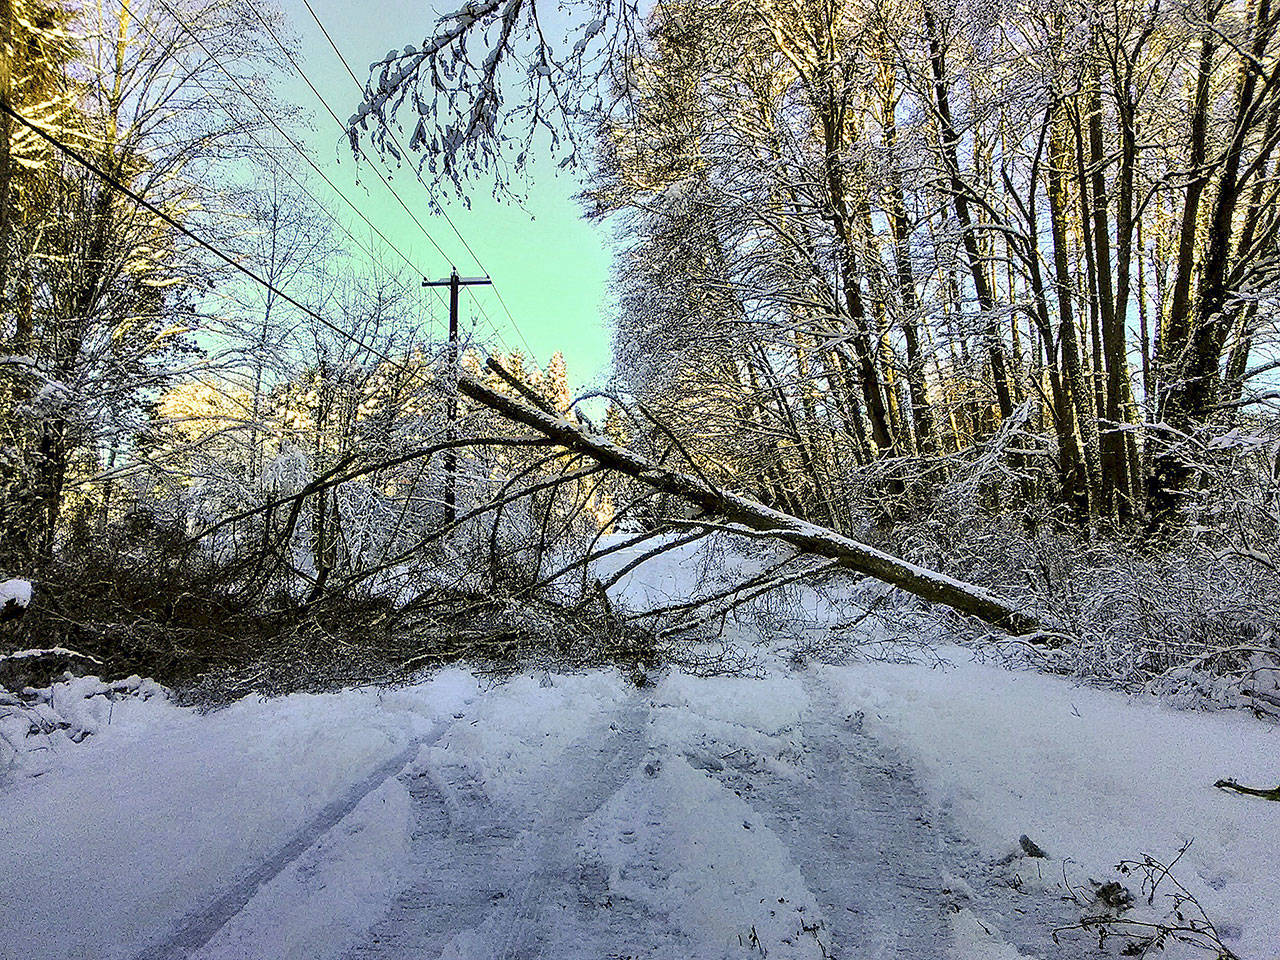 A fallen tree near Froggsong Gardens in Burton blocks the road after the snowstorm earlier this month. Obstacles such as fallen trees and abandoned cars make the job of clearing roads difficult for road crews to clear snow in King County, and the budget for snow removal is limited. (Paul Rowley/Staff Photo)